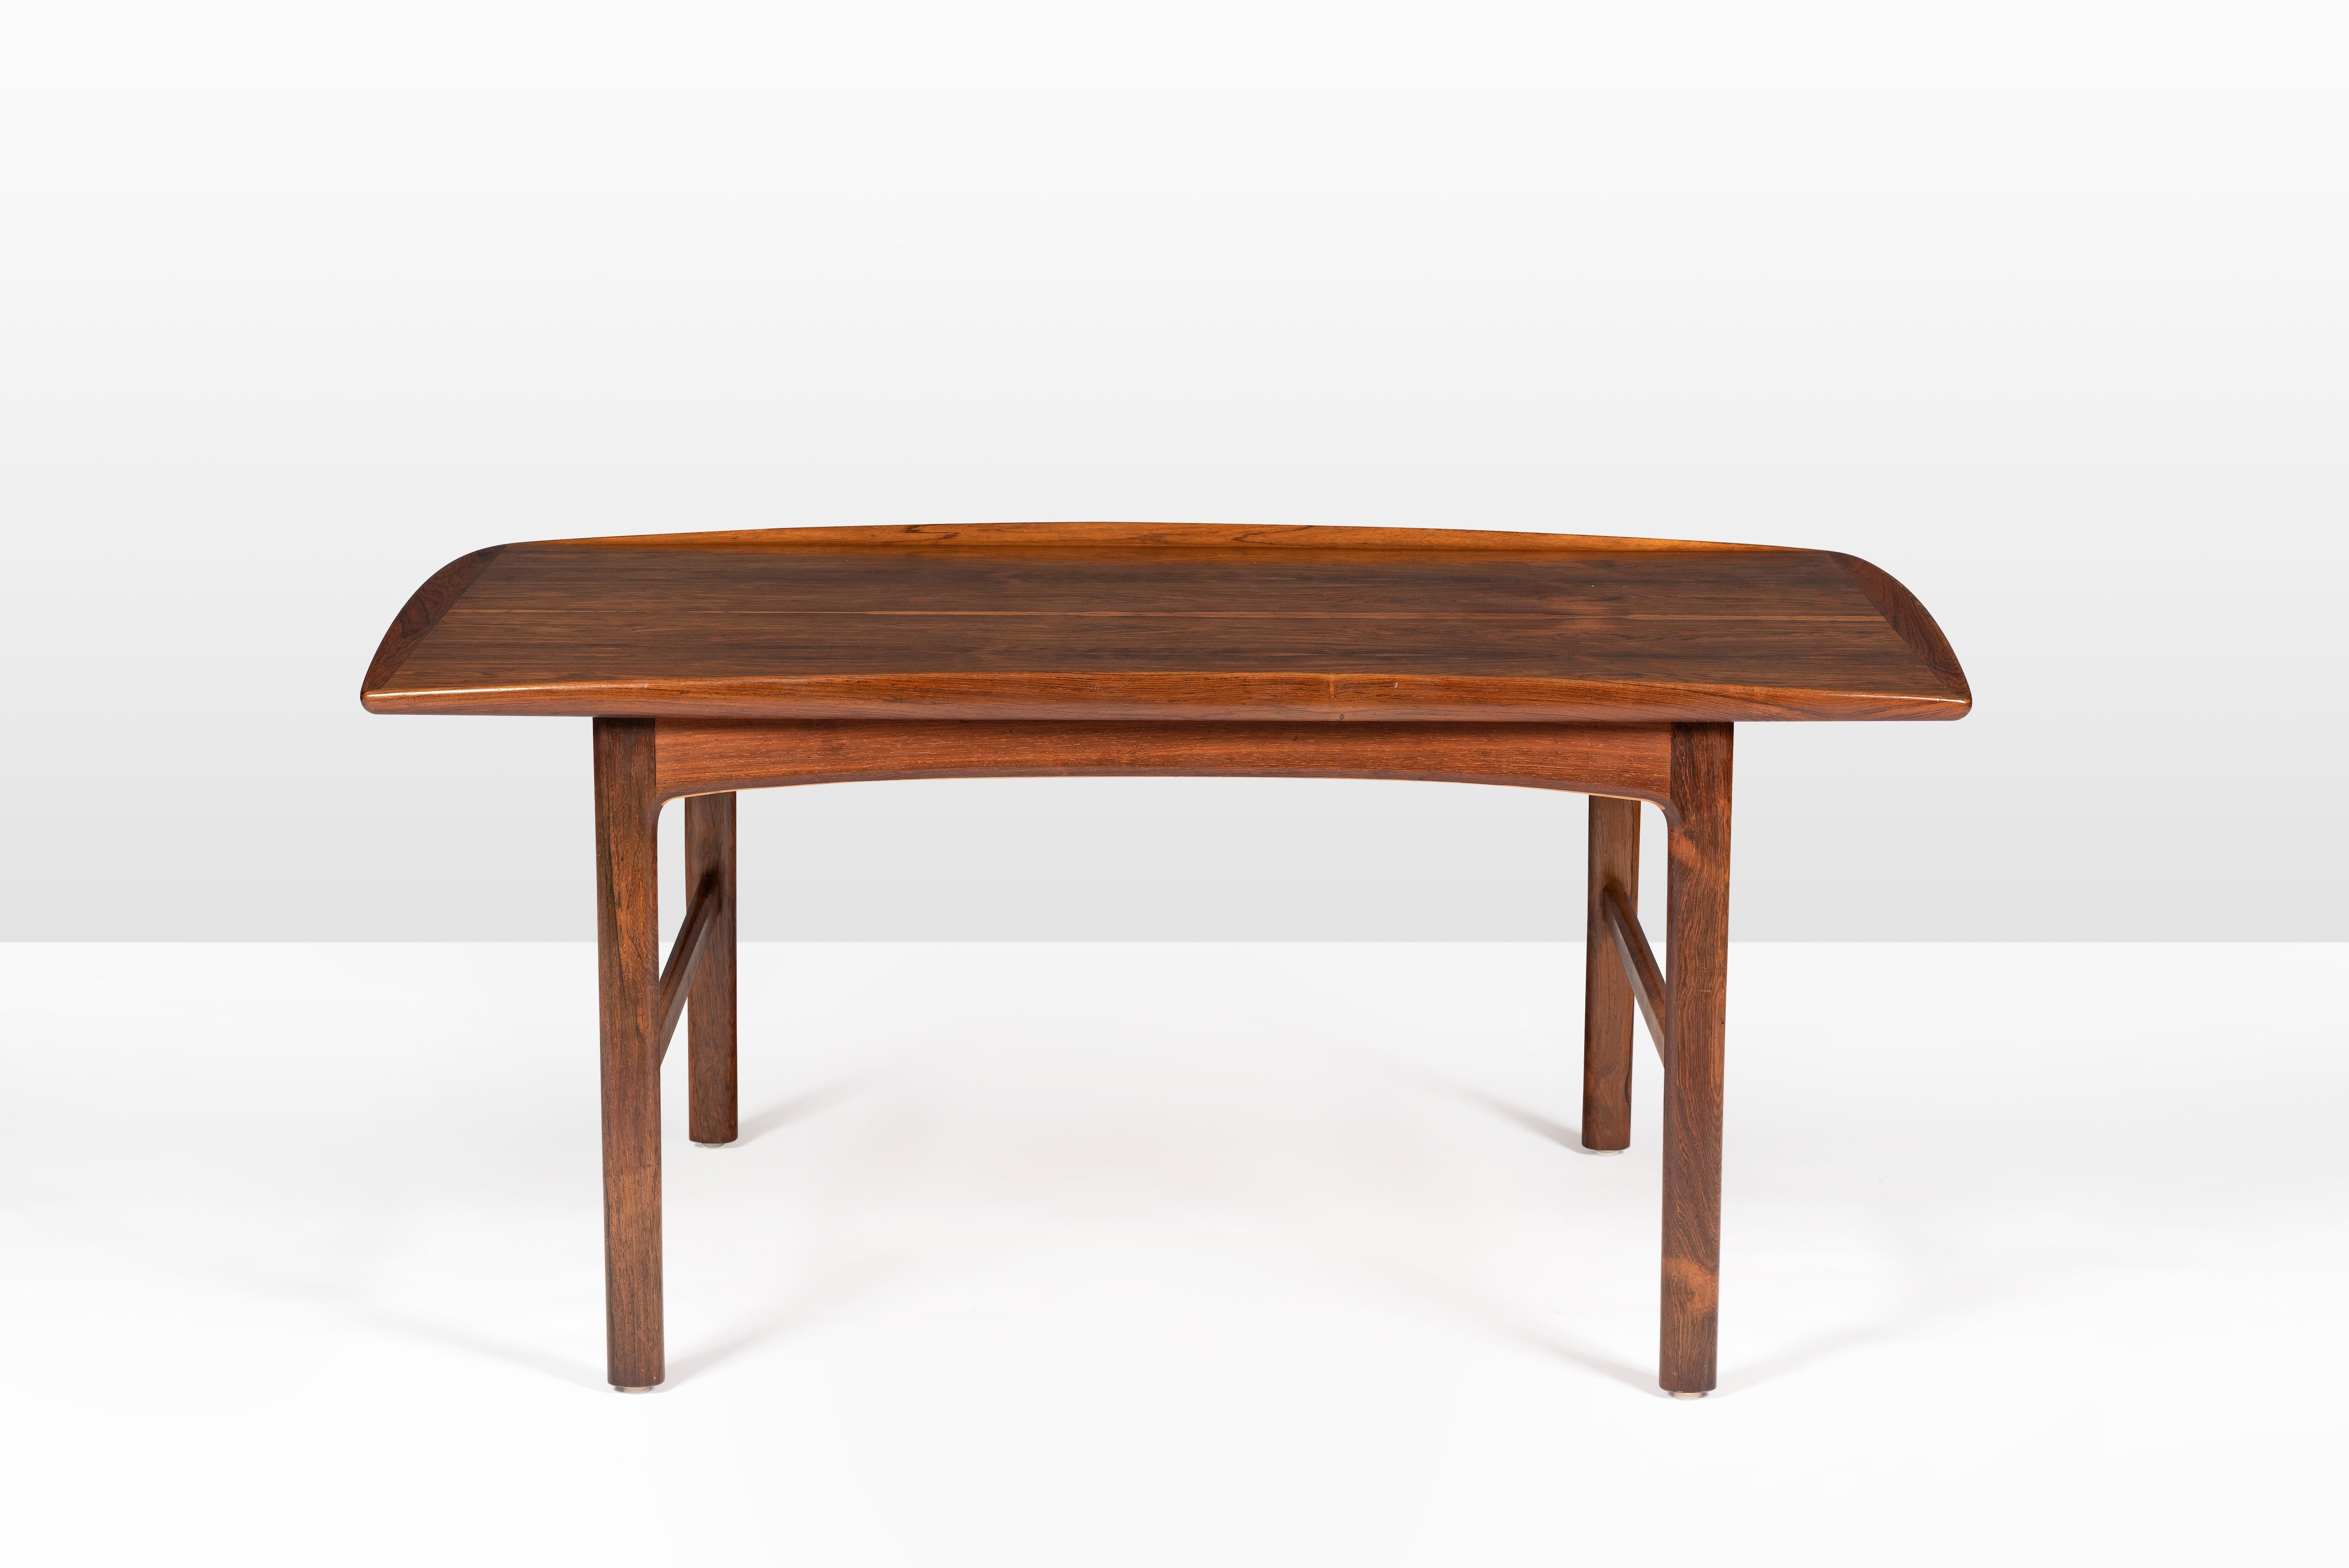 This elegant Danish modern midcentury surfboard coffee table model ‘Frisco’ was designed by Folke Ohlsson for Bra Bohag for Tingströms in the 1960s. Is flanked by raised lips on the sides.